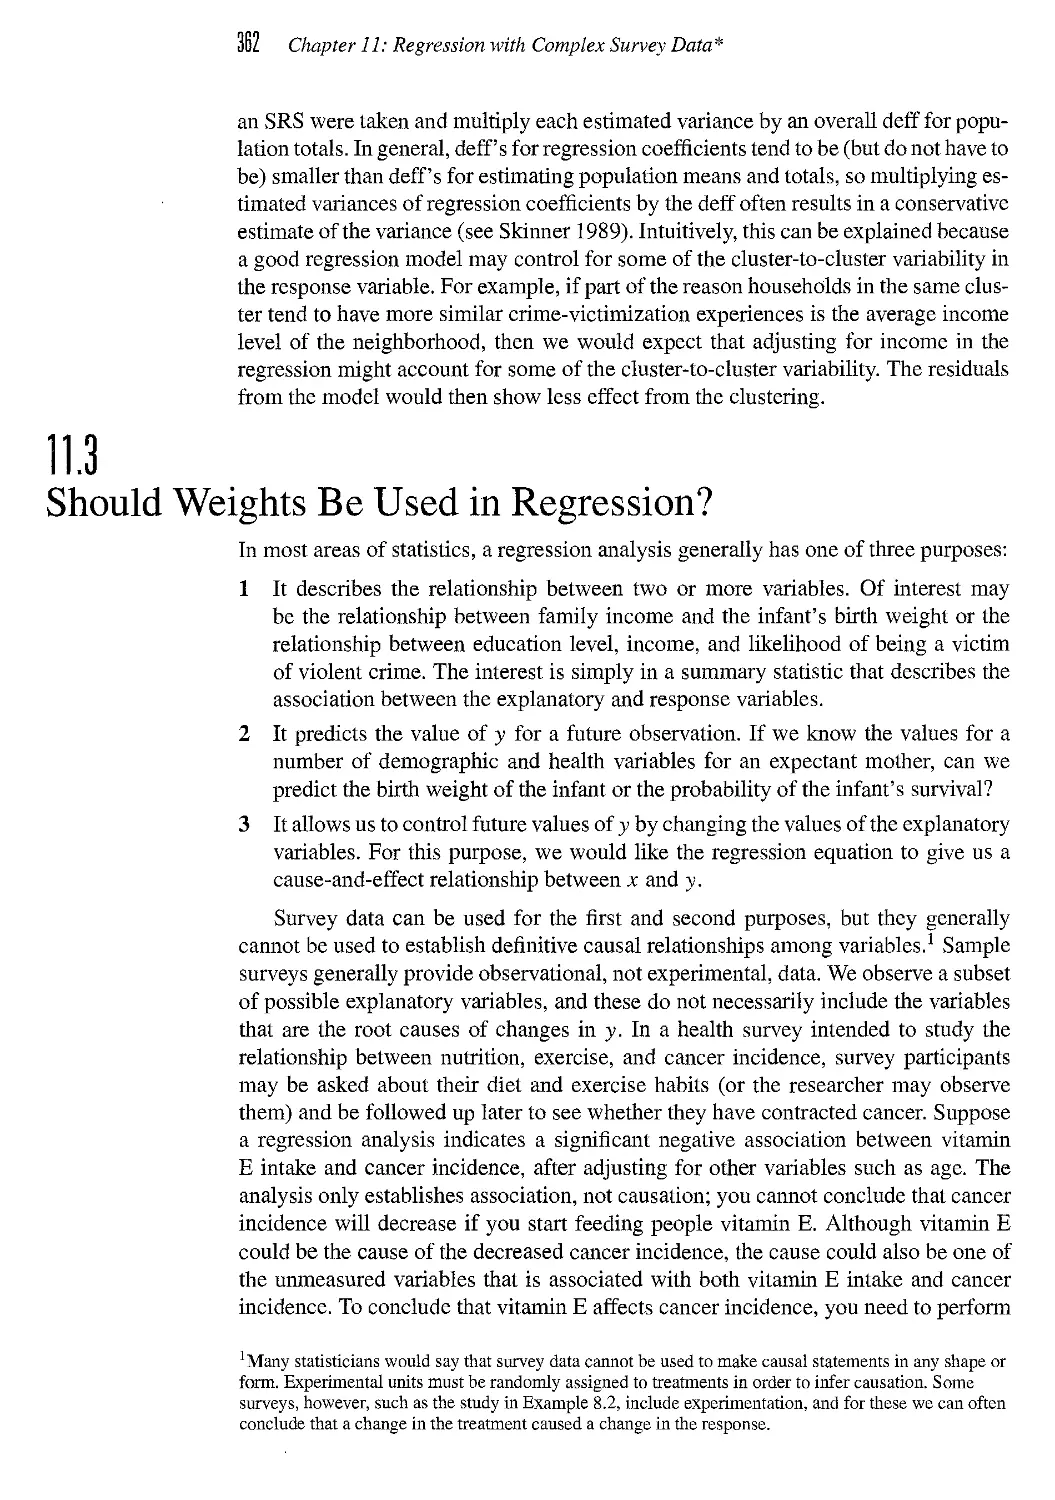 11.3 Should Weights Be Used in Regression?